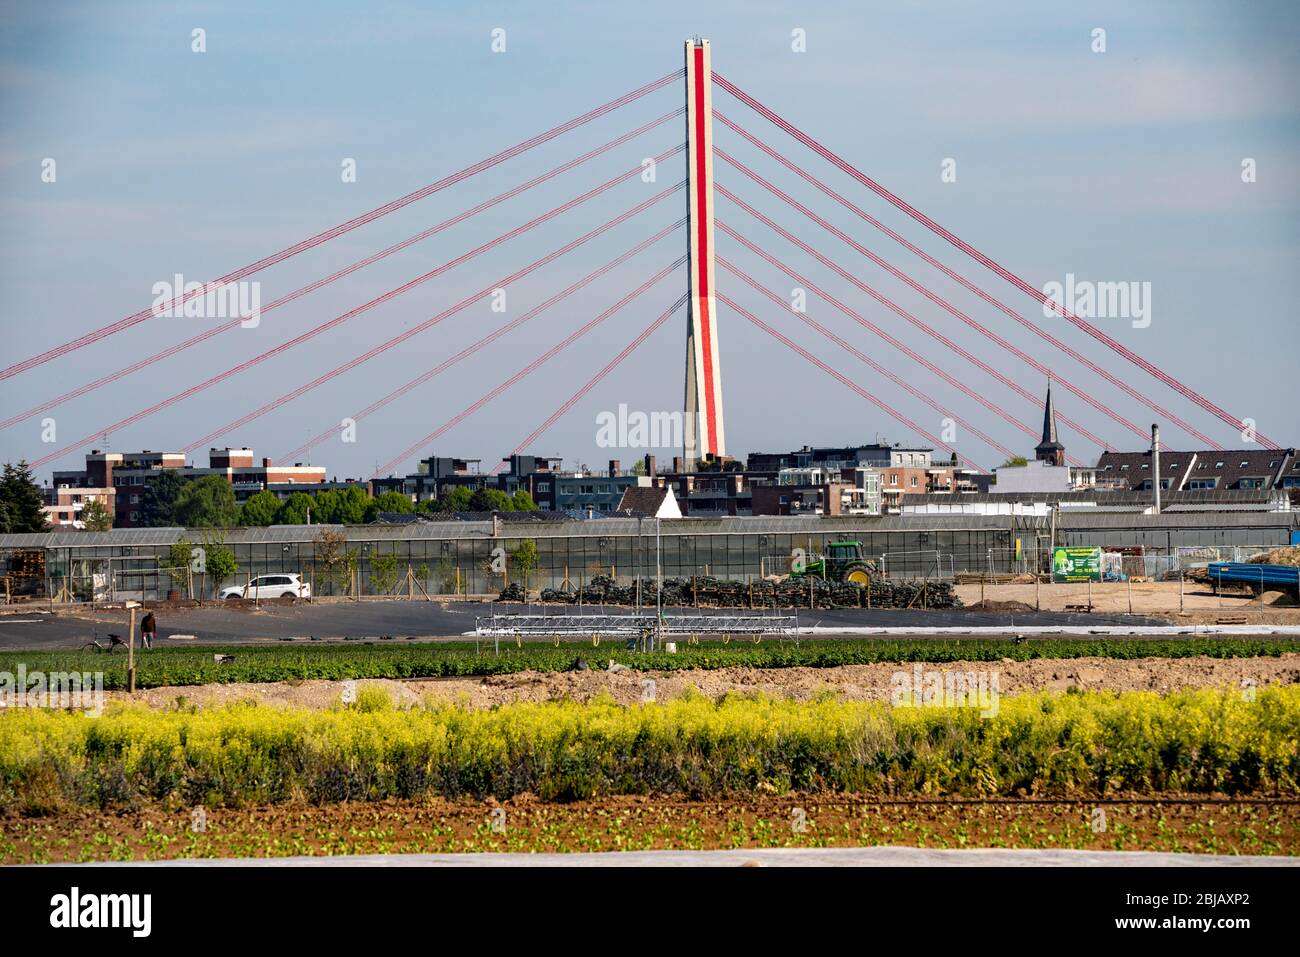 Agricultural businesses, horticulture in DŸsseldorf Volmerswerth, Fleher Bridge, motorway A46, NRW, Germany Stock Photo